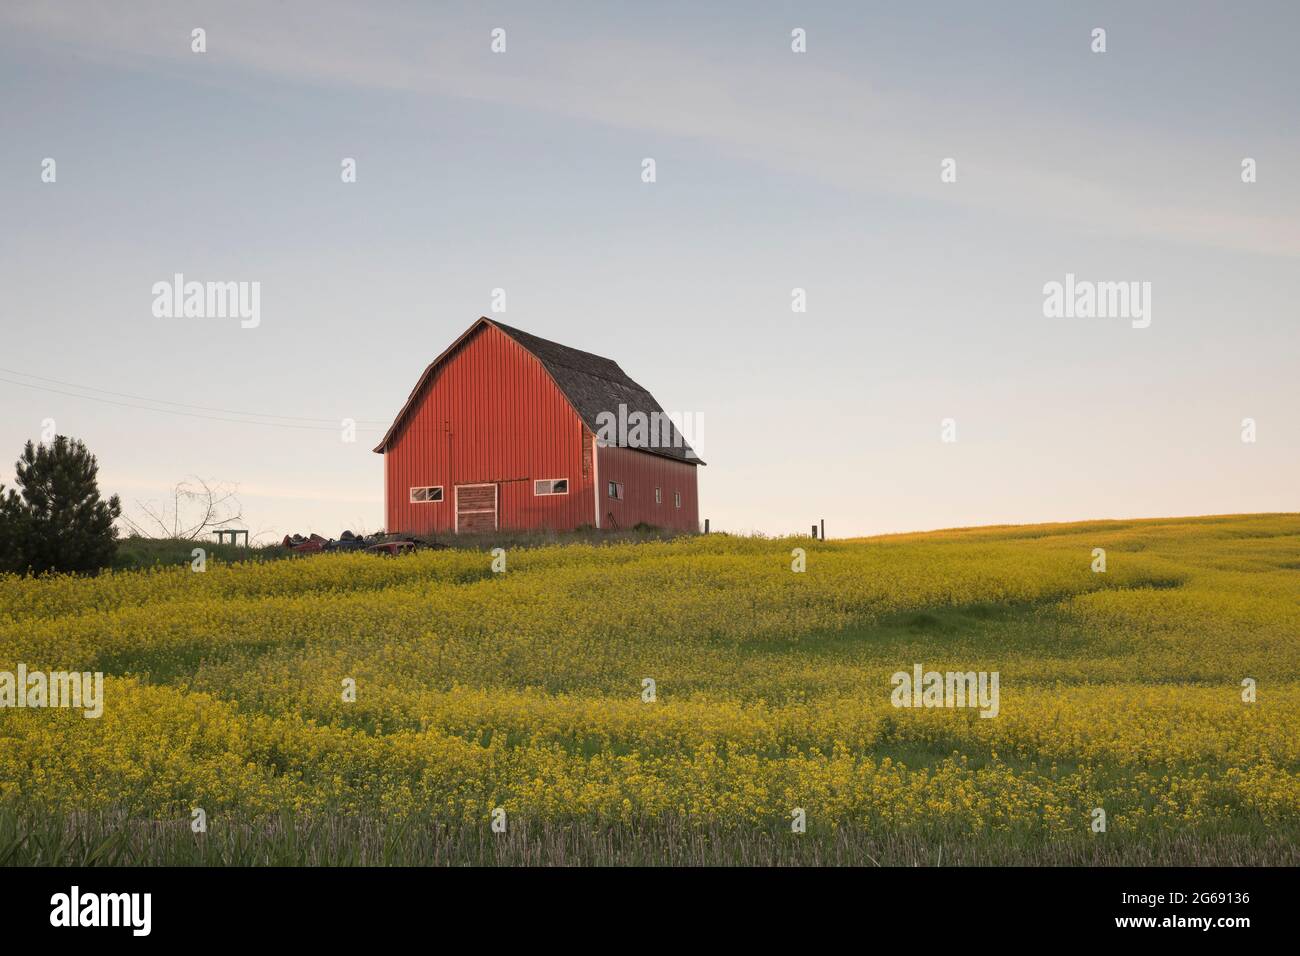 Evening scene of red barn in field of canola, Washington state. Stock Photo